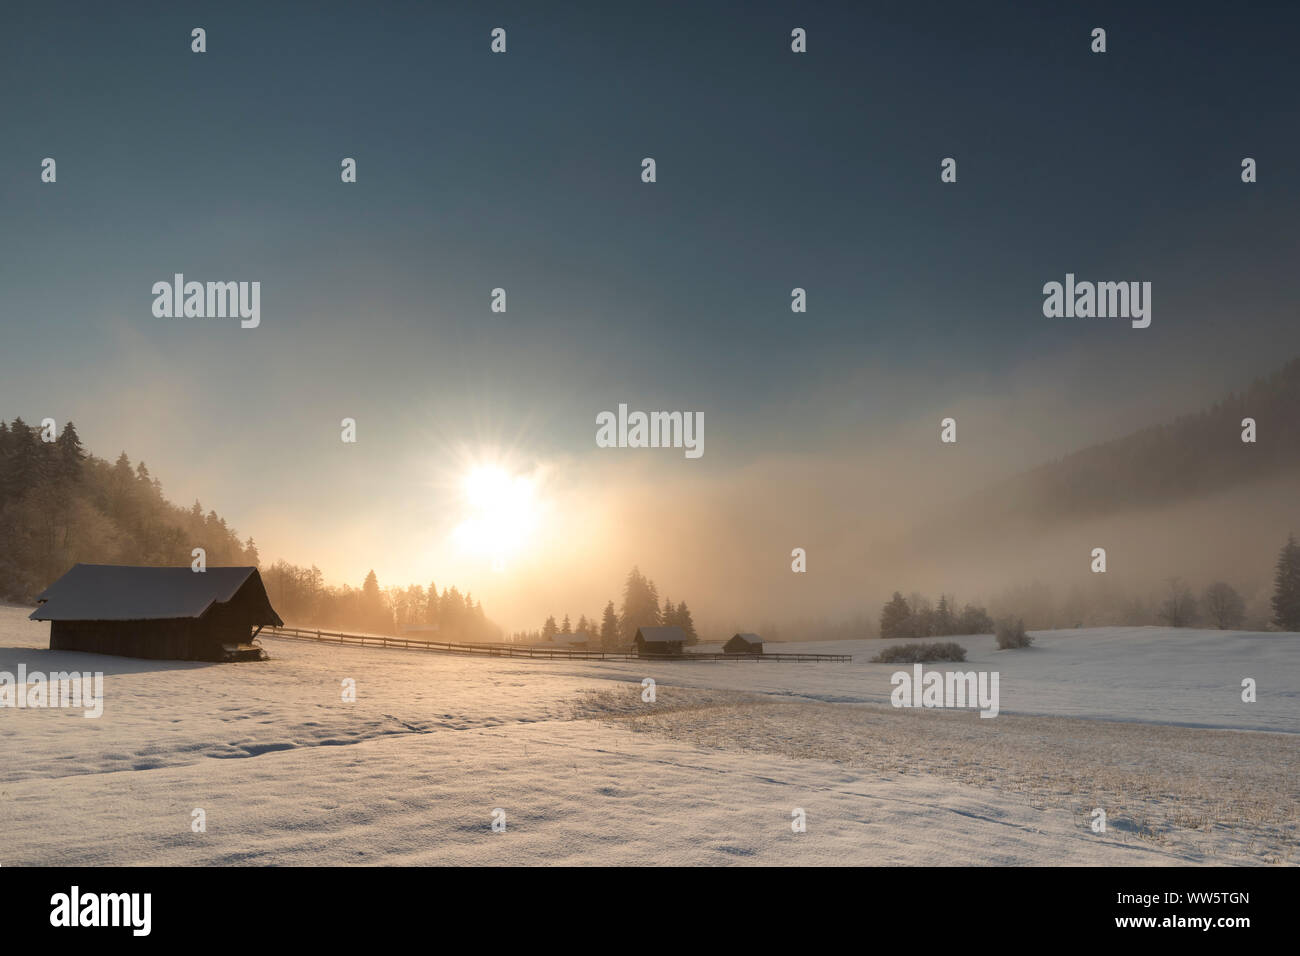 Hut in snow-covered alpine winter landscape close Garmisch Partenkirchen. In the background the rising sun in the morning fog with other wooden huts. Stock Photo